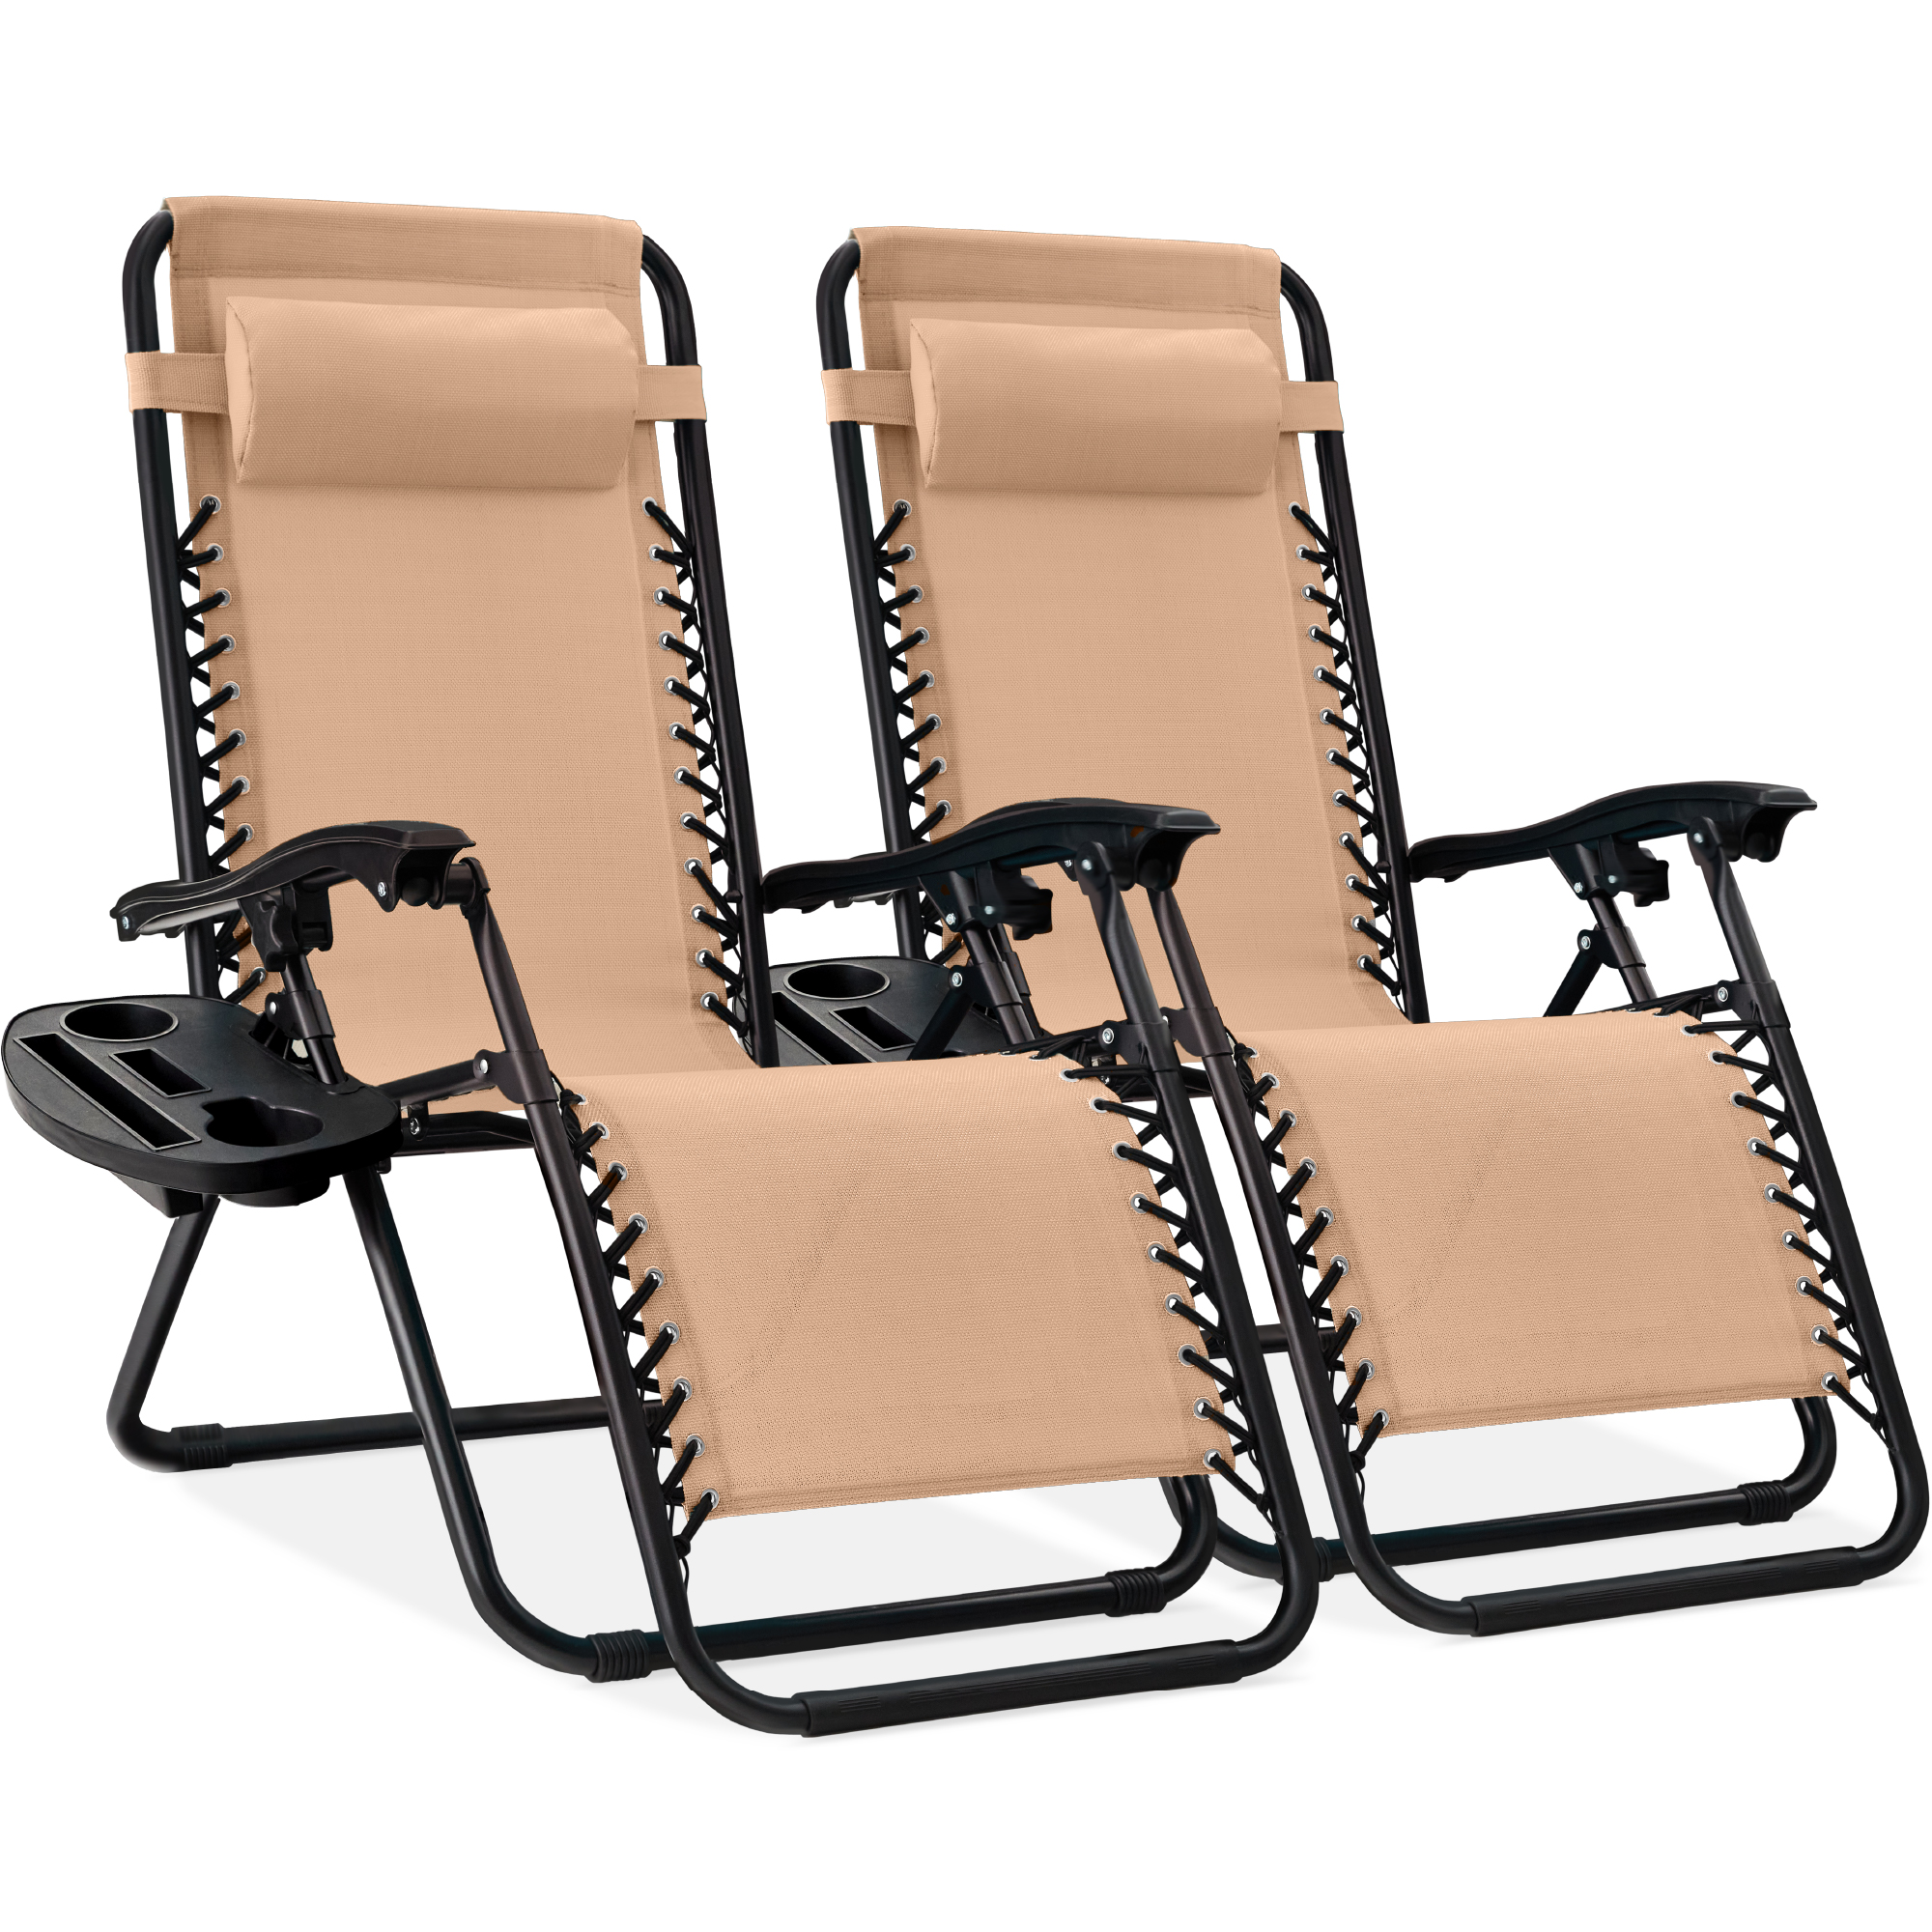 Best Choice Products Set of 2 Zero Gravity Lounge Chair Recliners for Patio, Pool w/ Cup Holder Tray - Beige - image 1 of 9